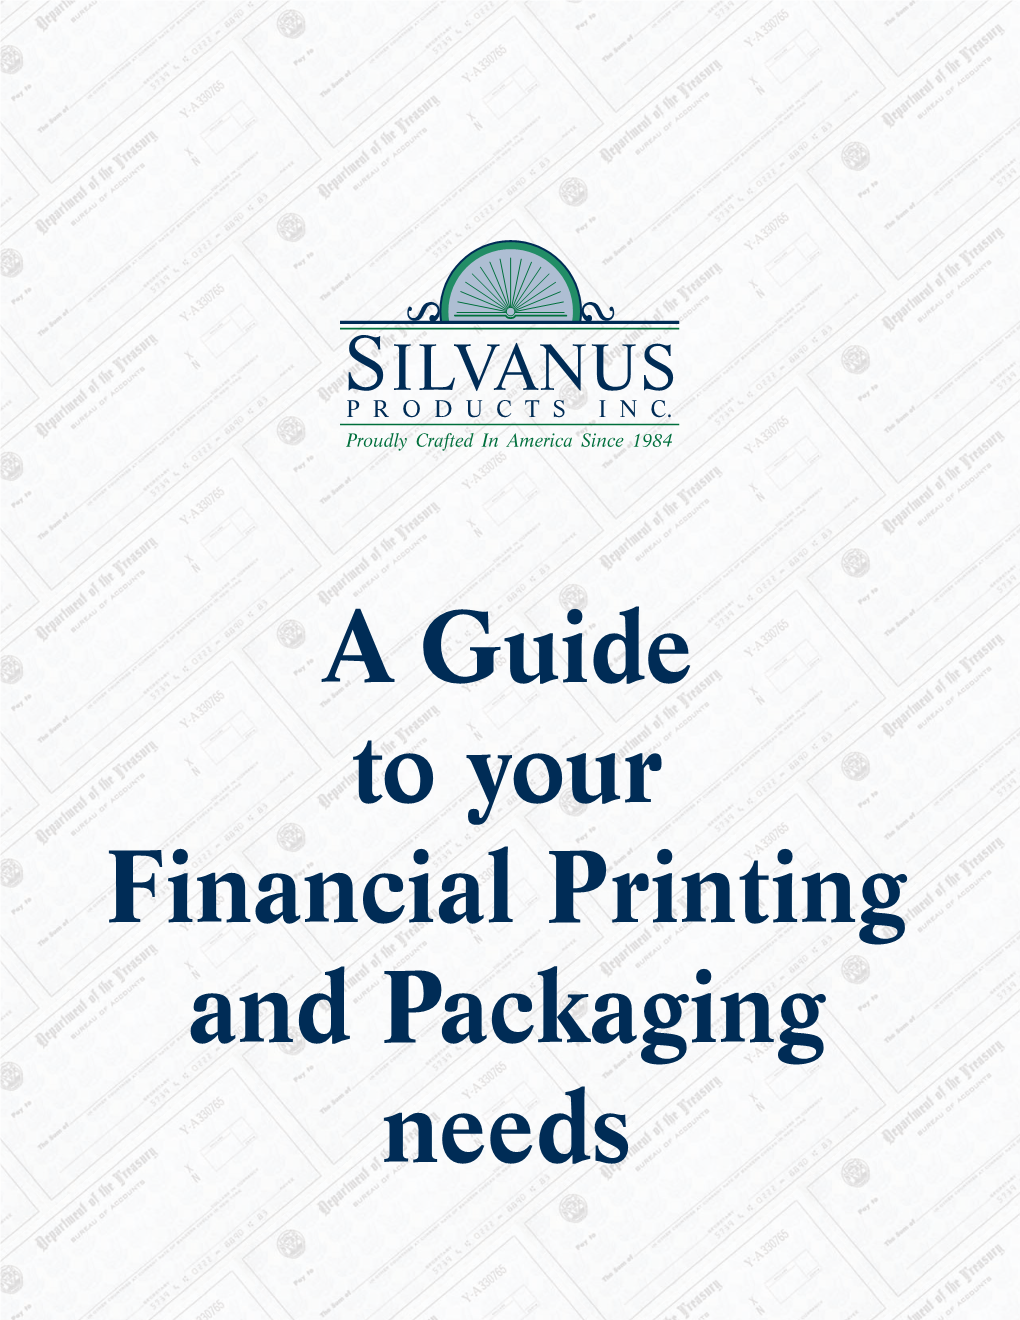 A Guide to Your Financial Printing and Packaging Needs General Information the Standard Products Included in the List Are Used by Many of Our Customers